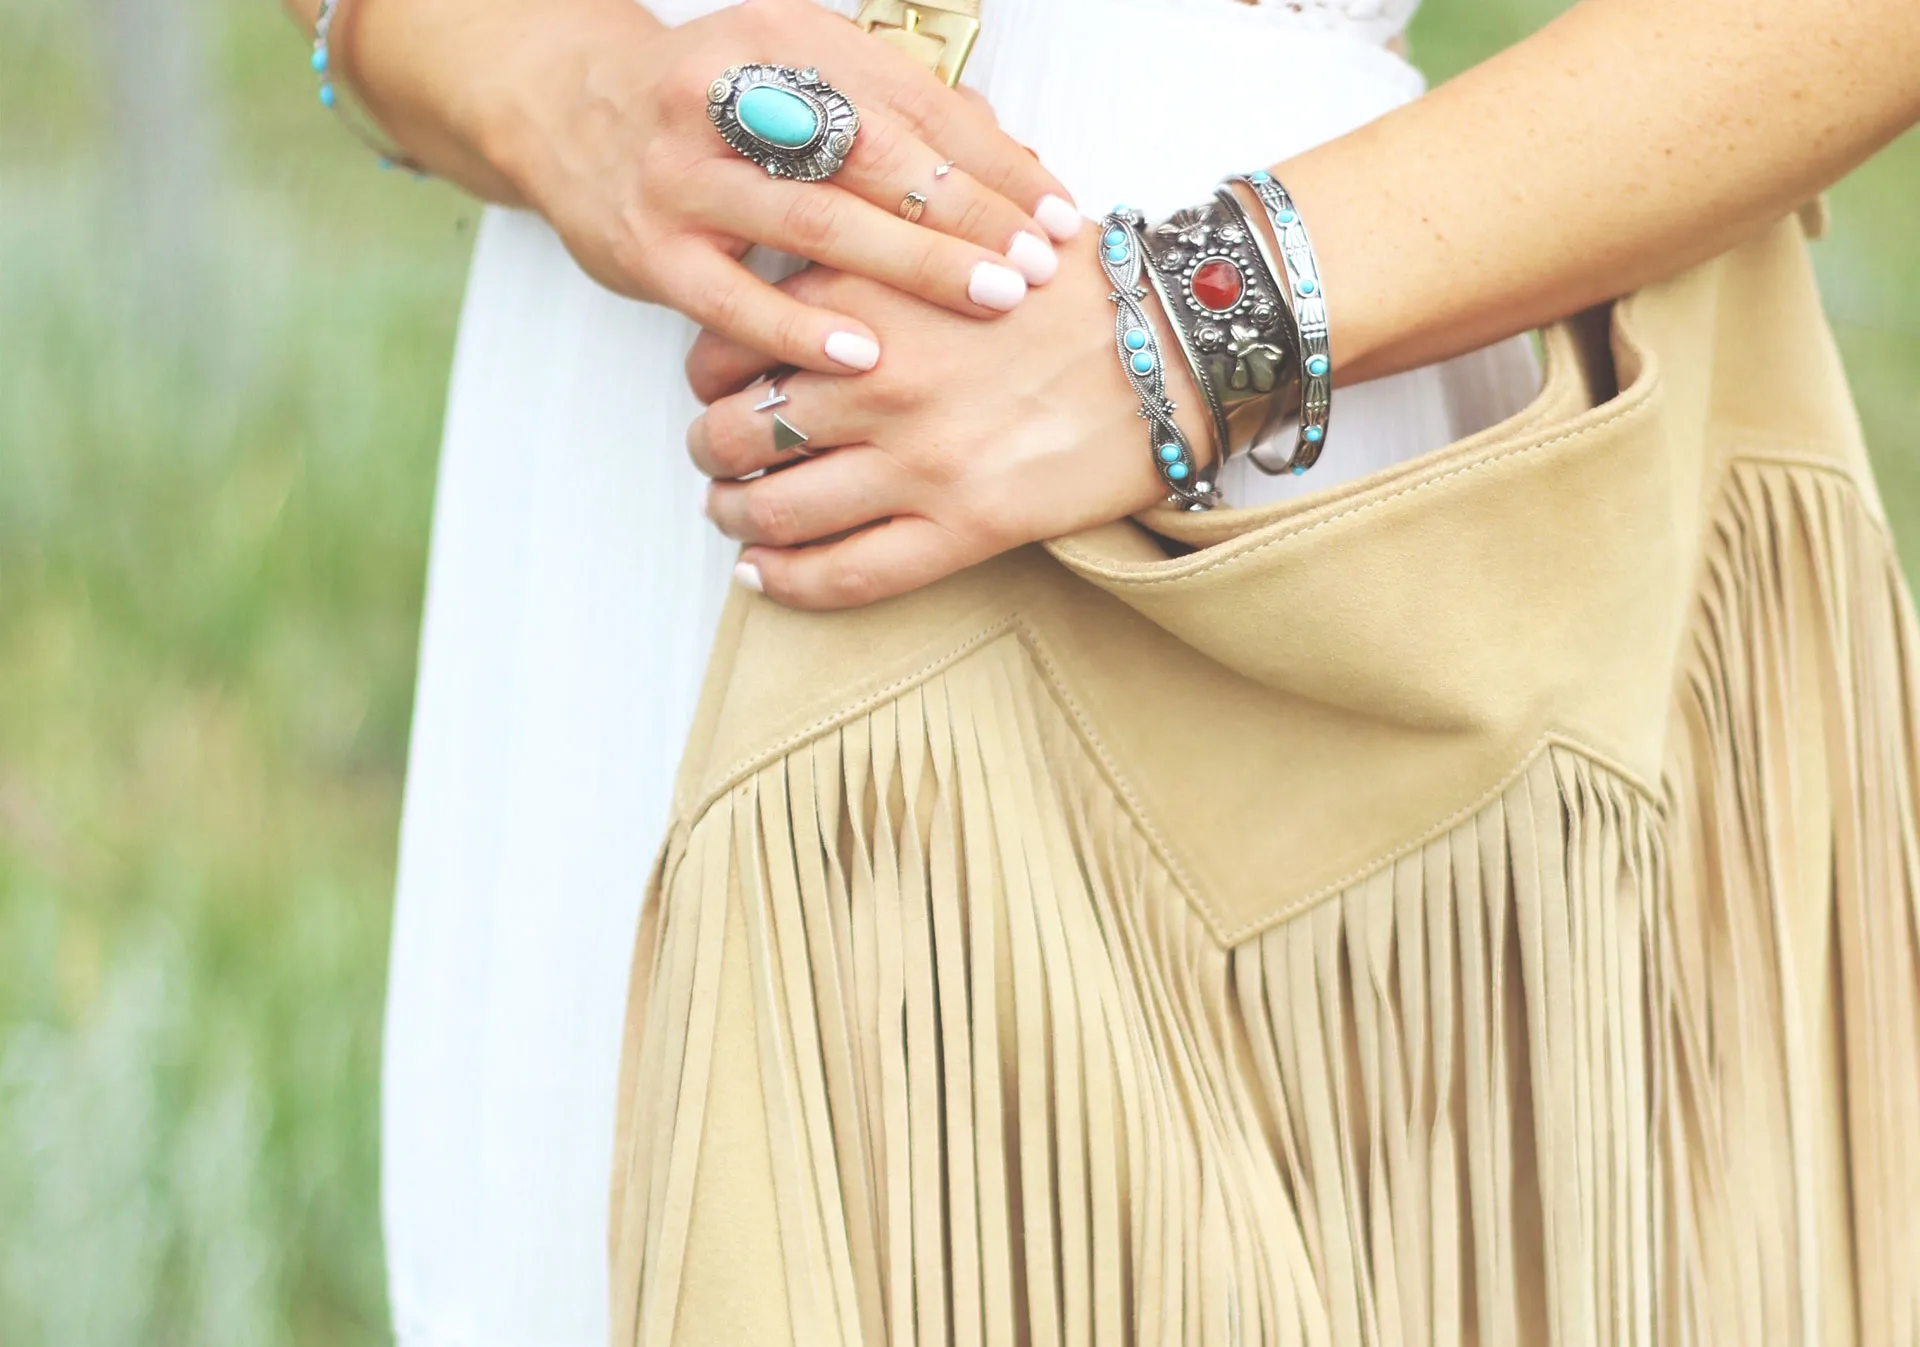 Suede is synonymous with western style and fringe adds a playful touch to any look.